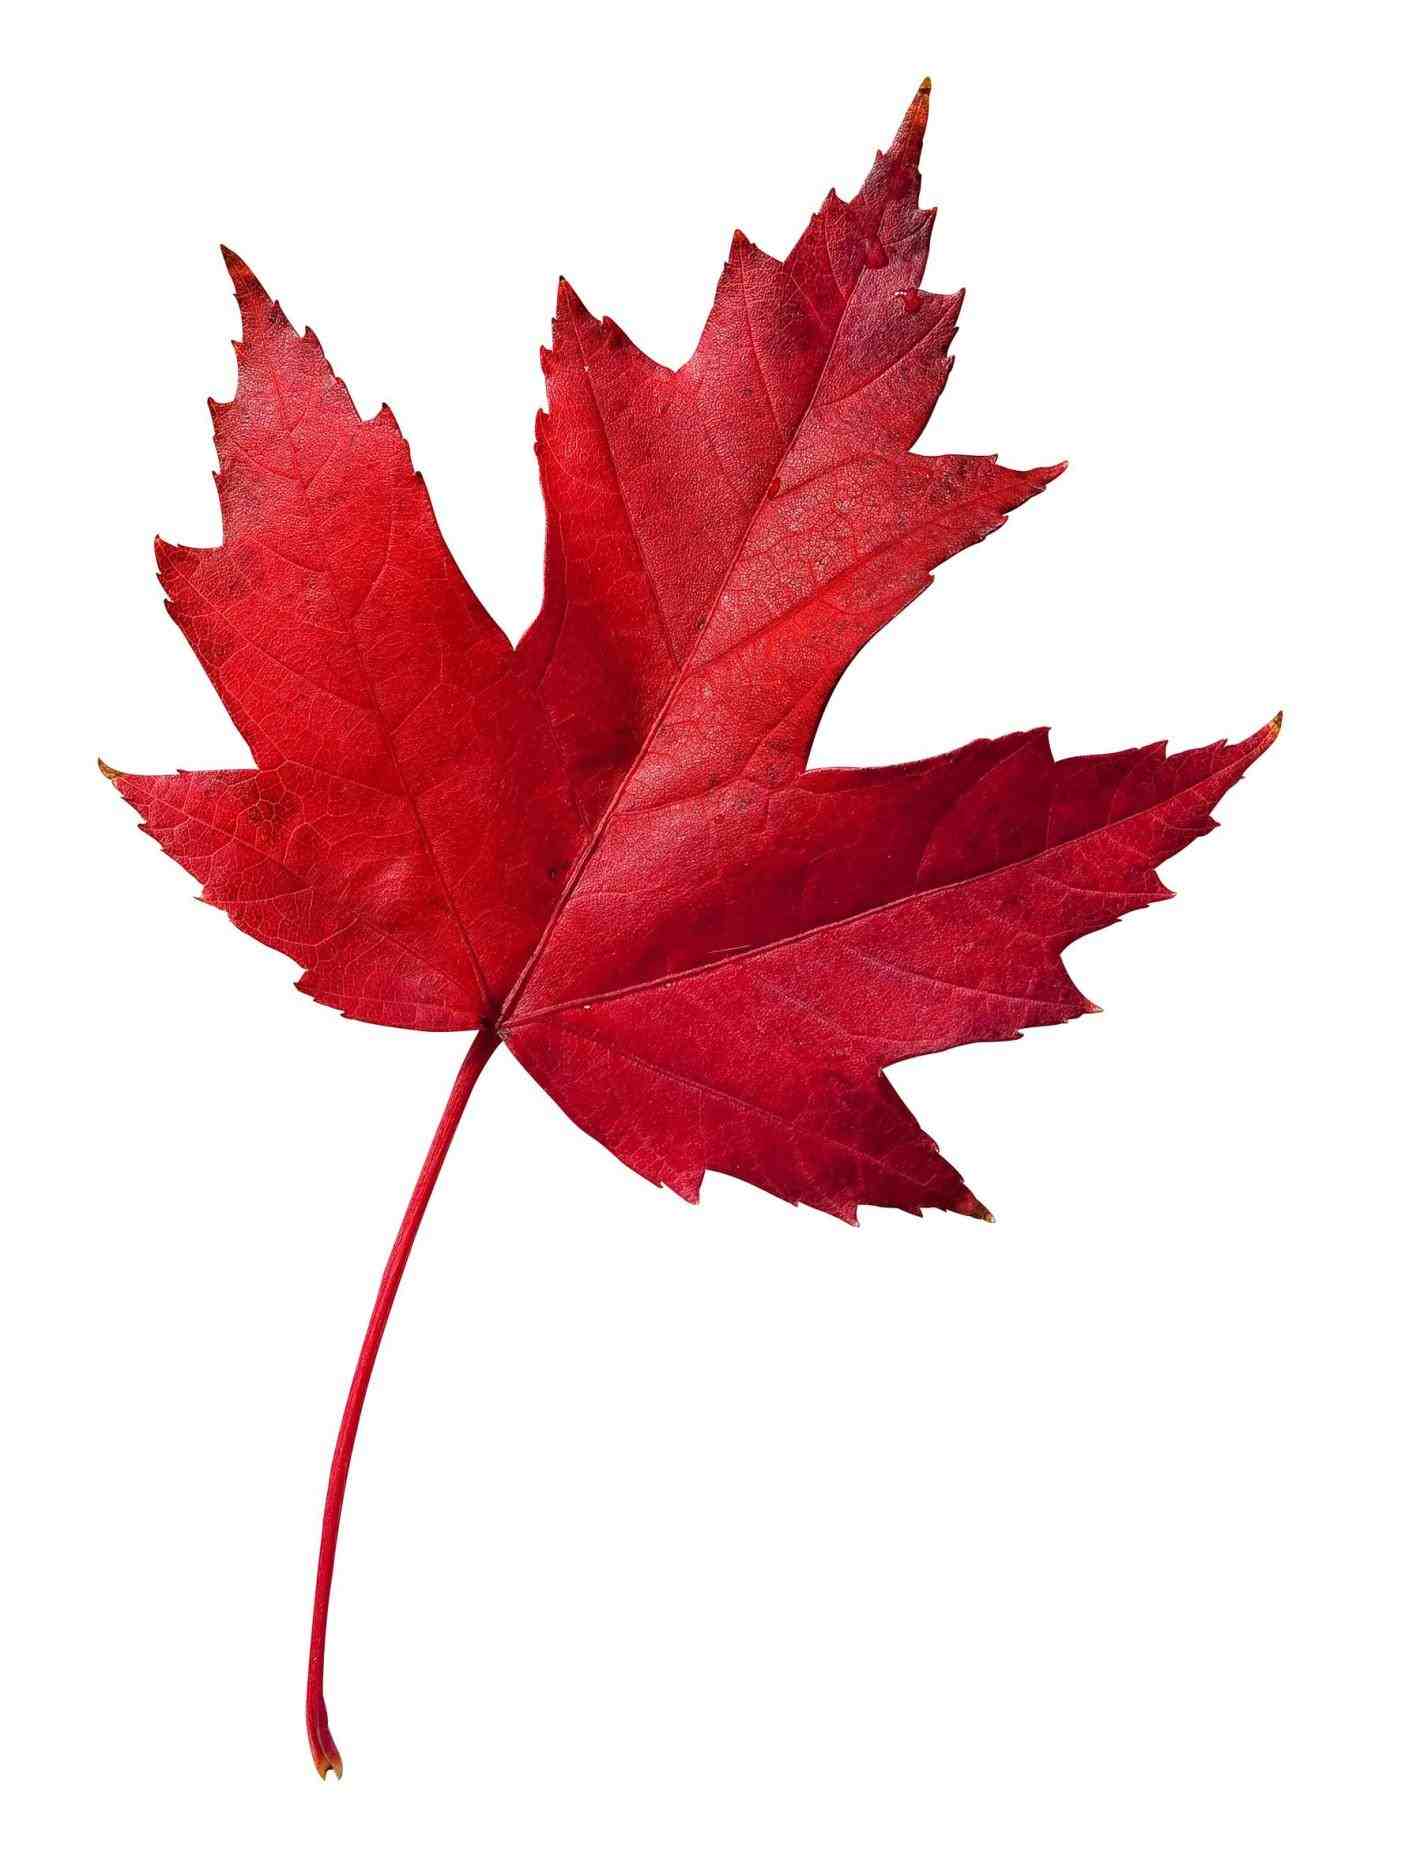 red maple leaf identification › ClipArt